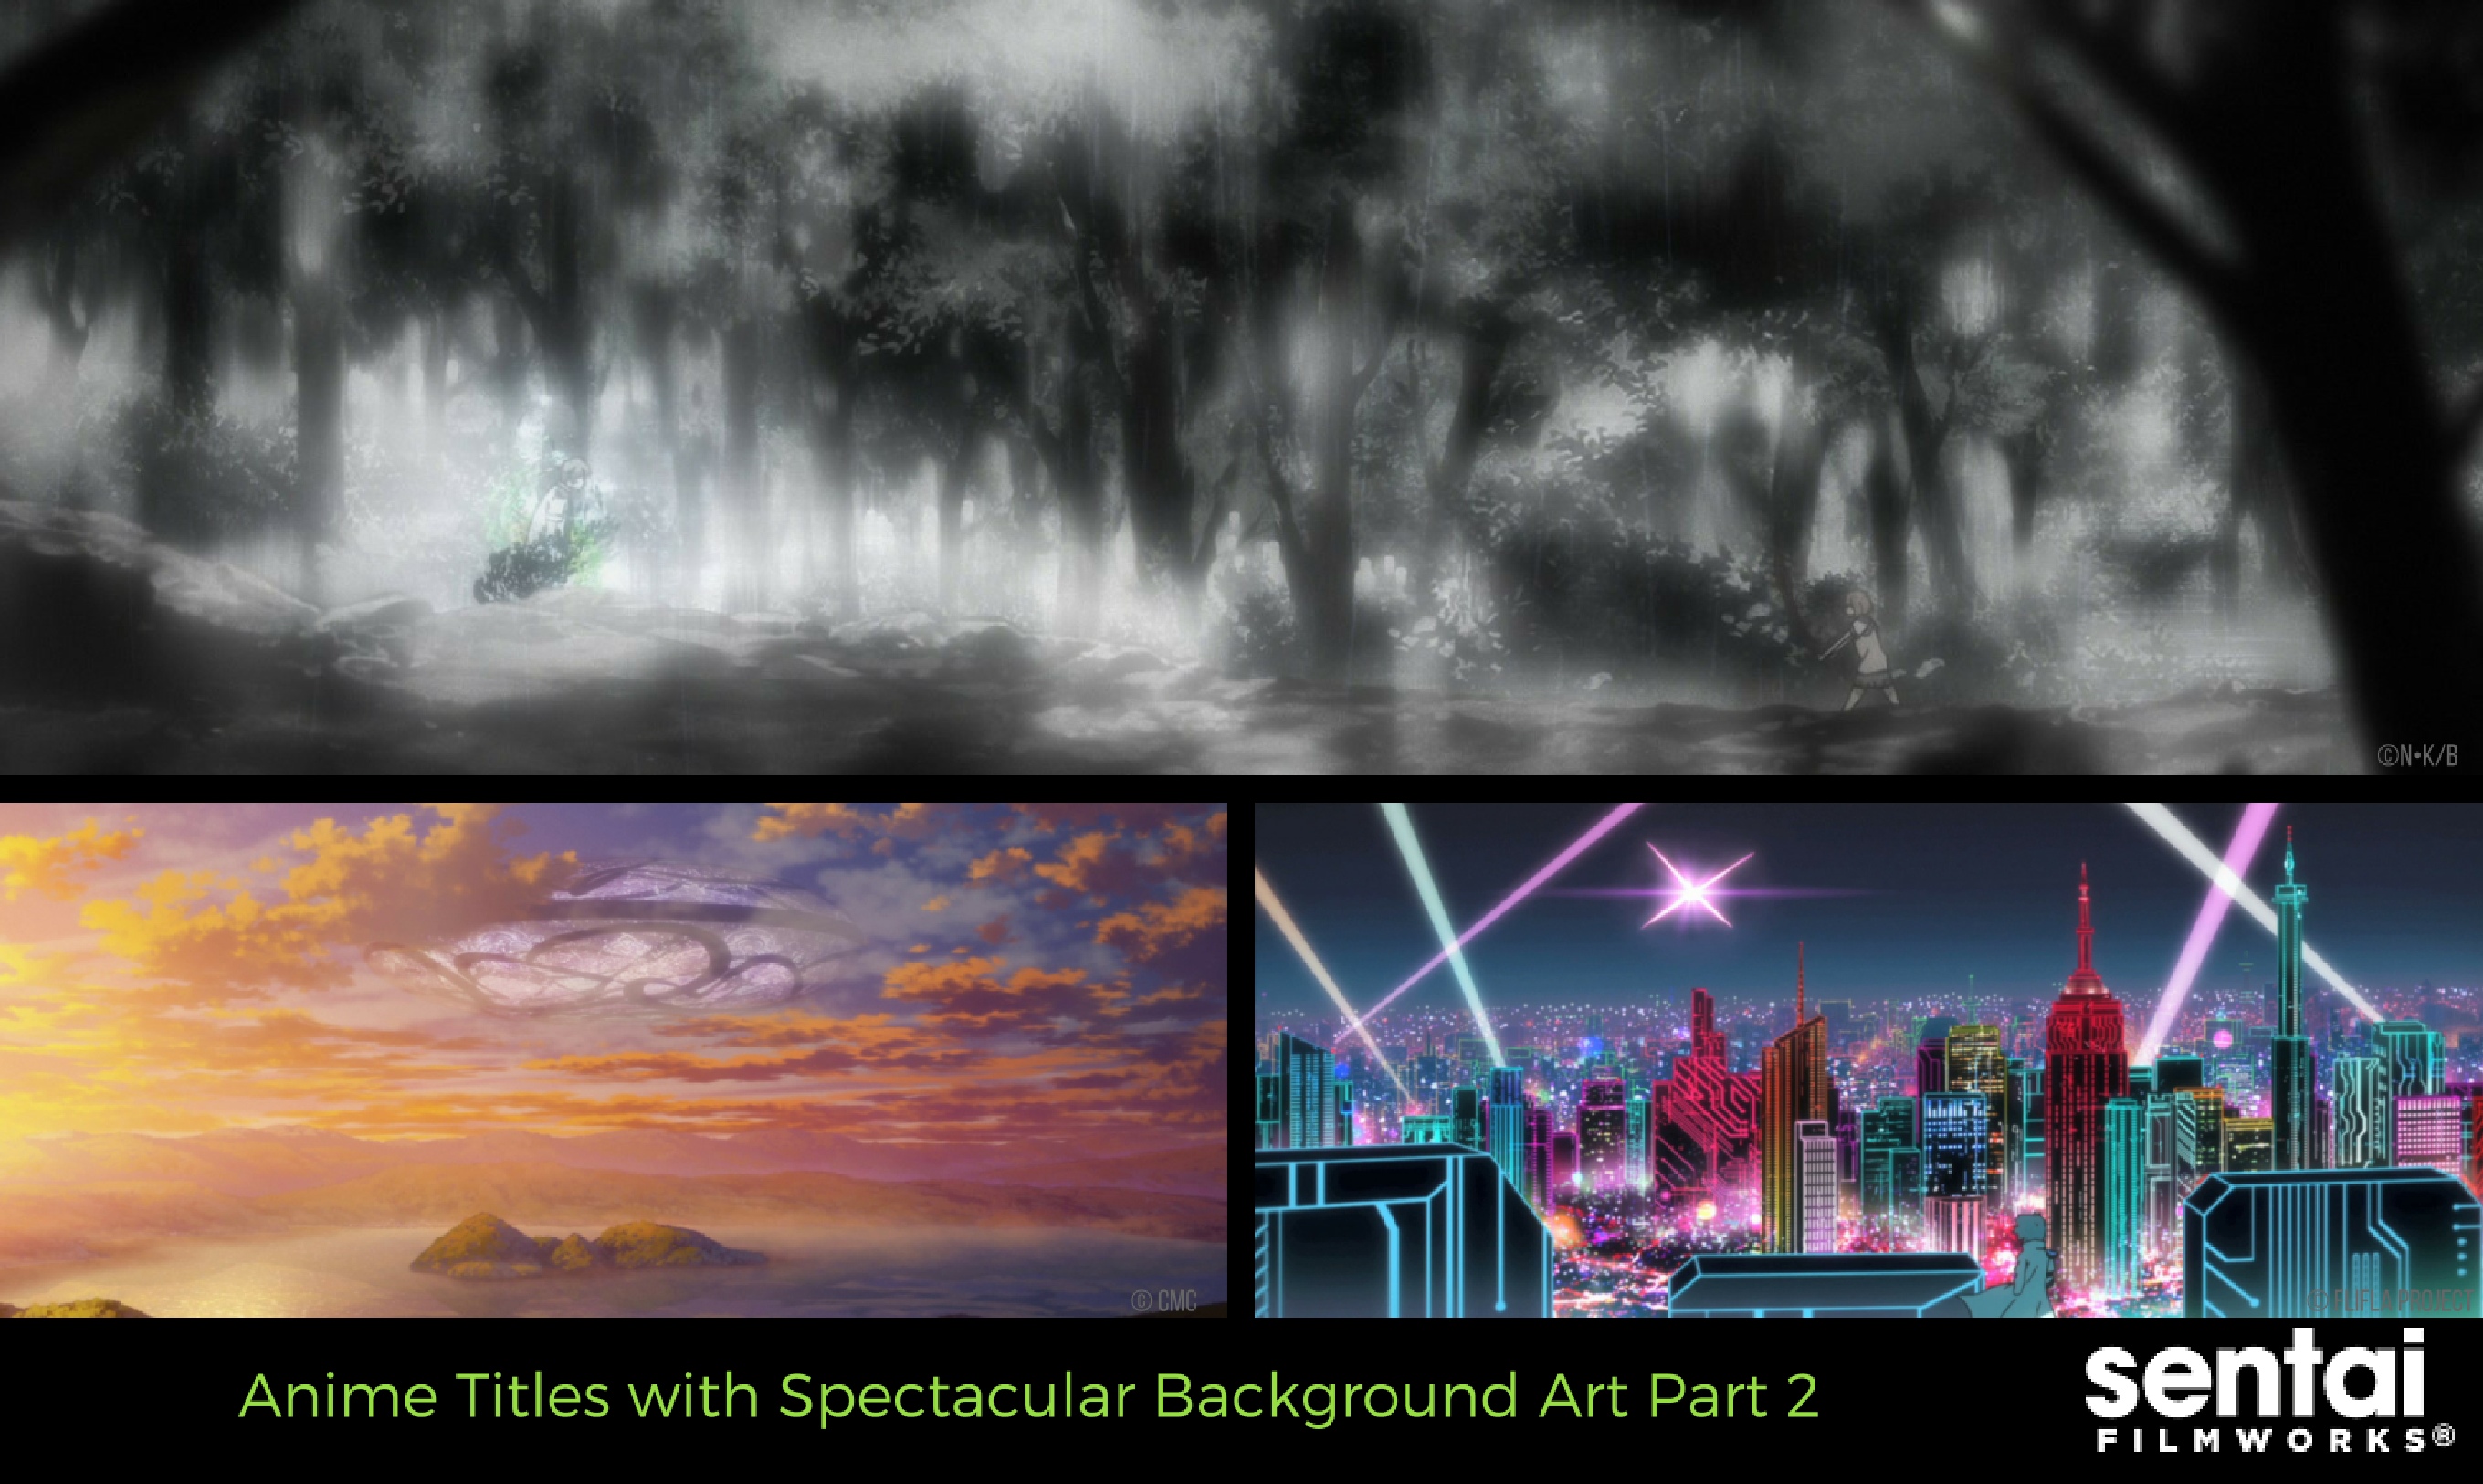 Anime Titles with Spectacular Background Art Part 2